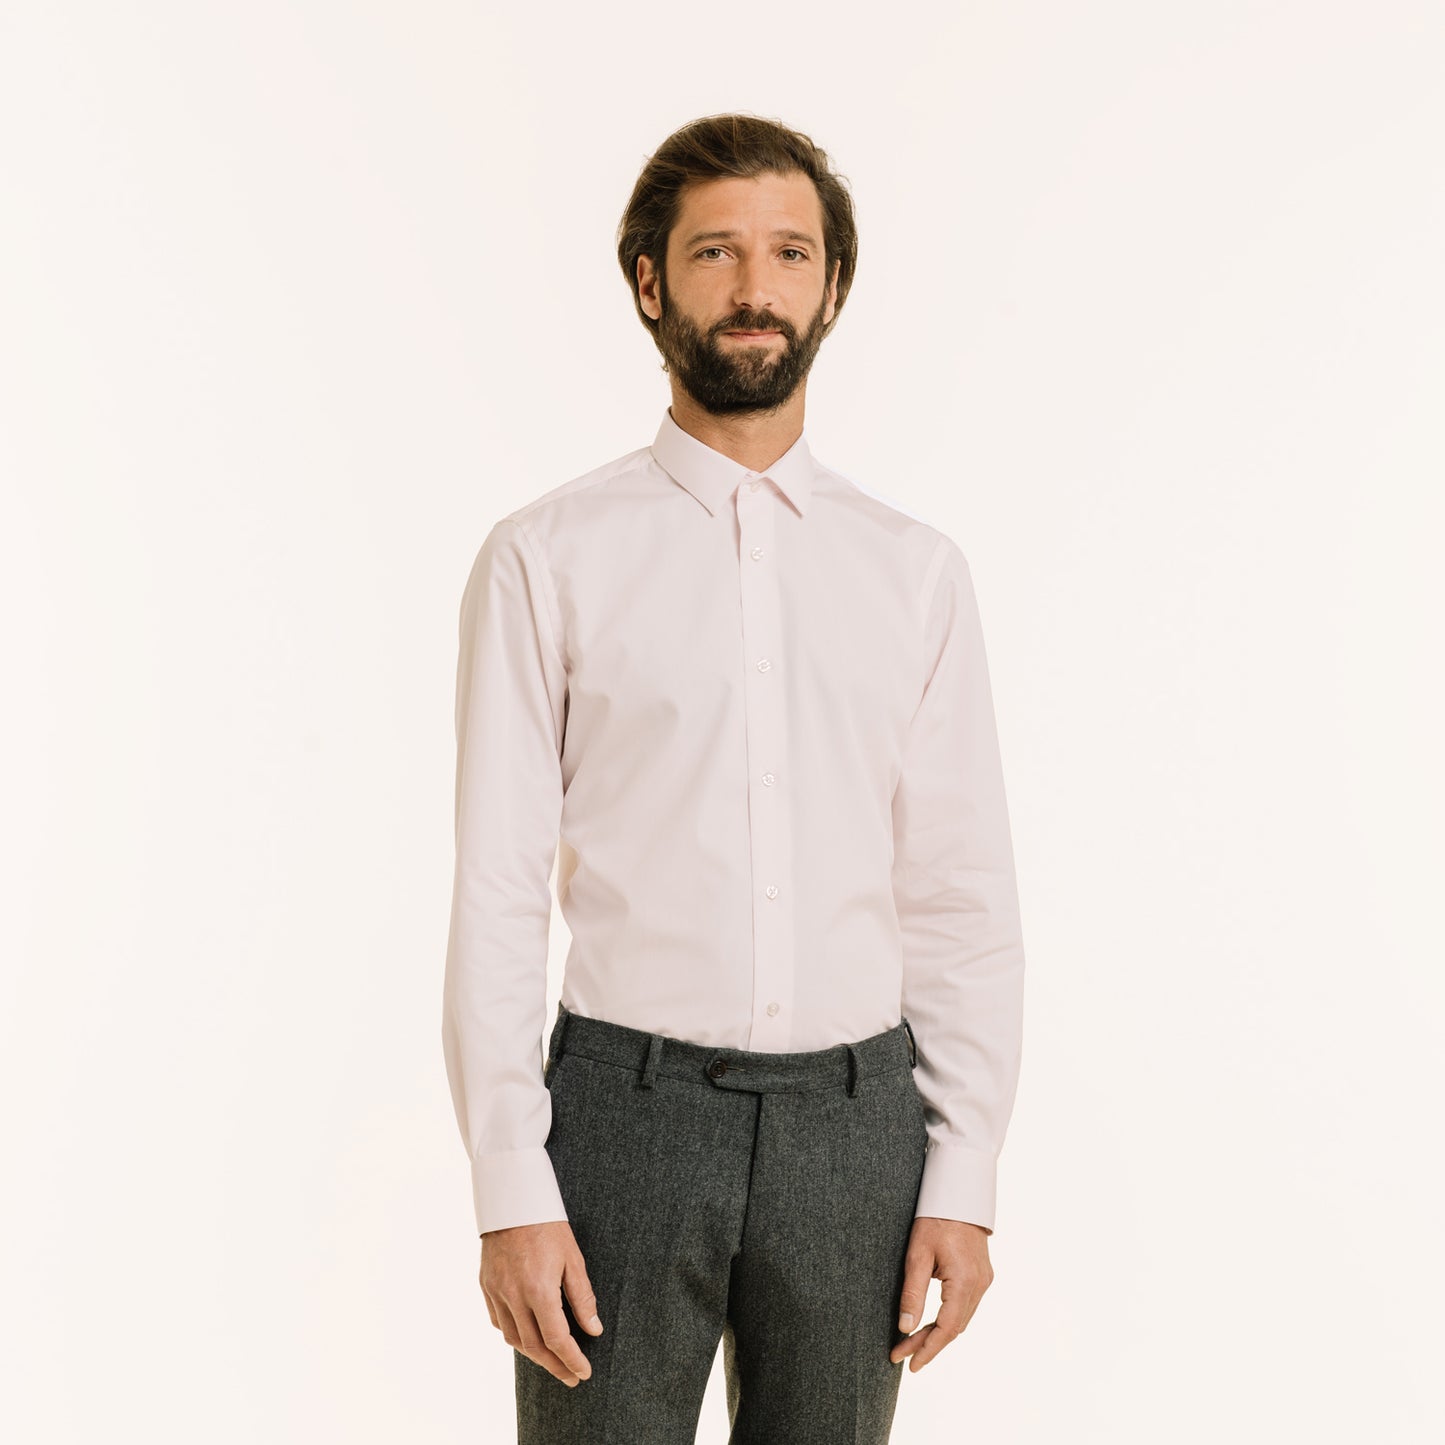 Fitted shirt in pale pink double-twisted poplin